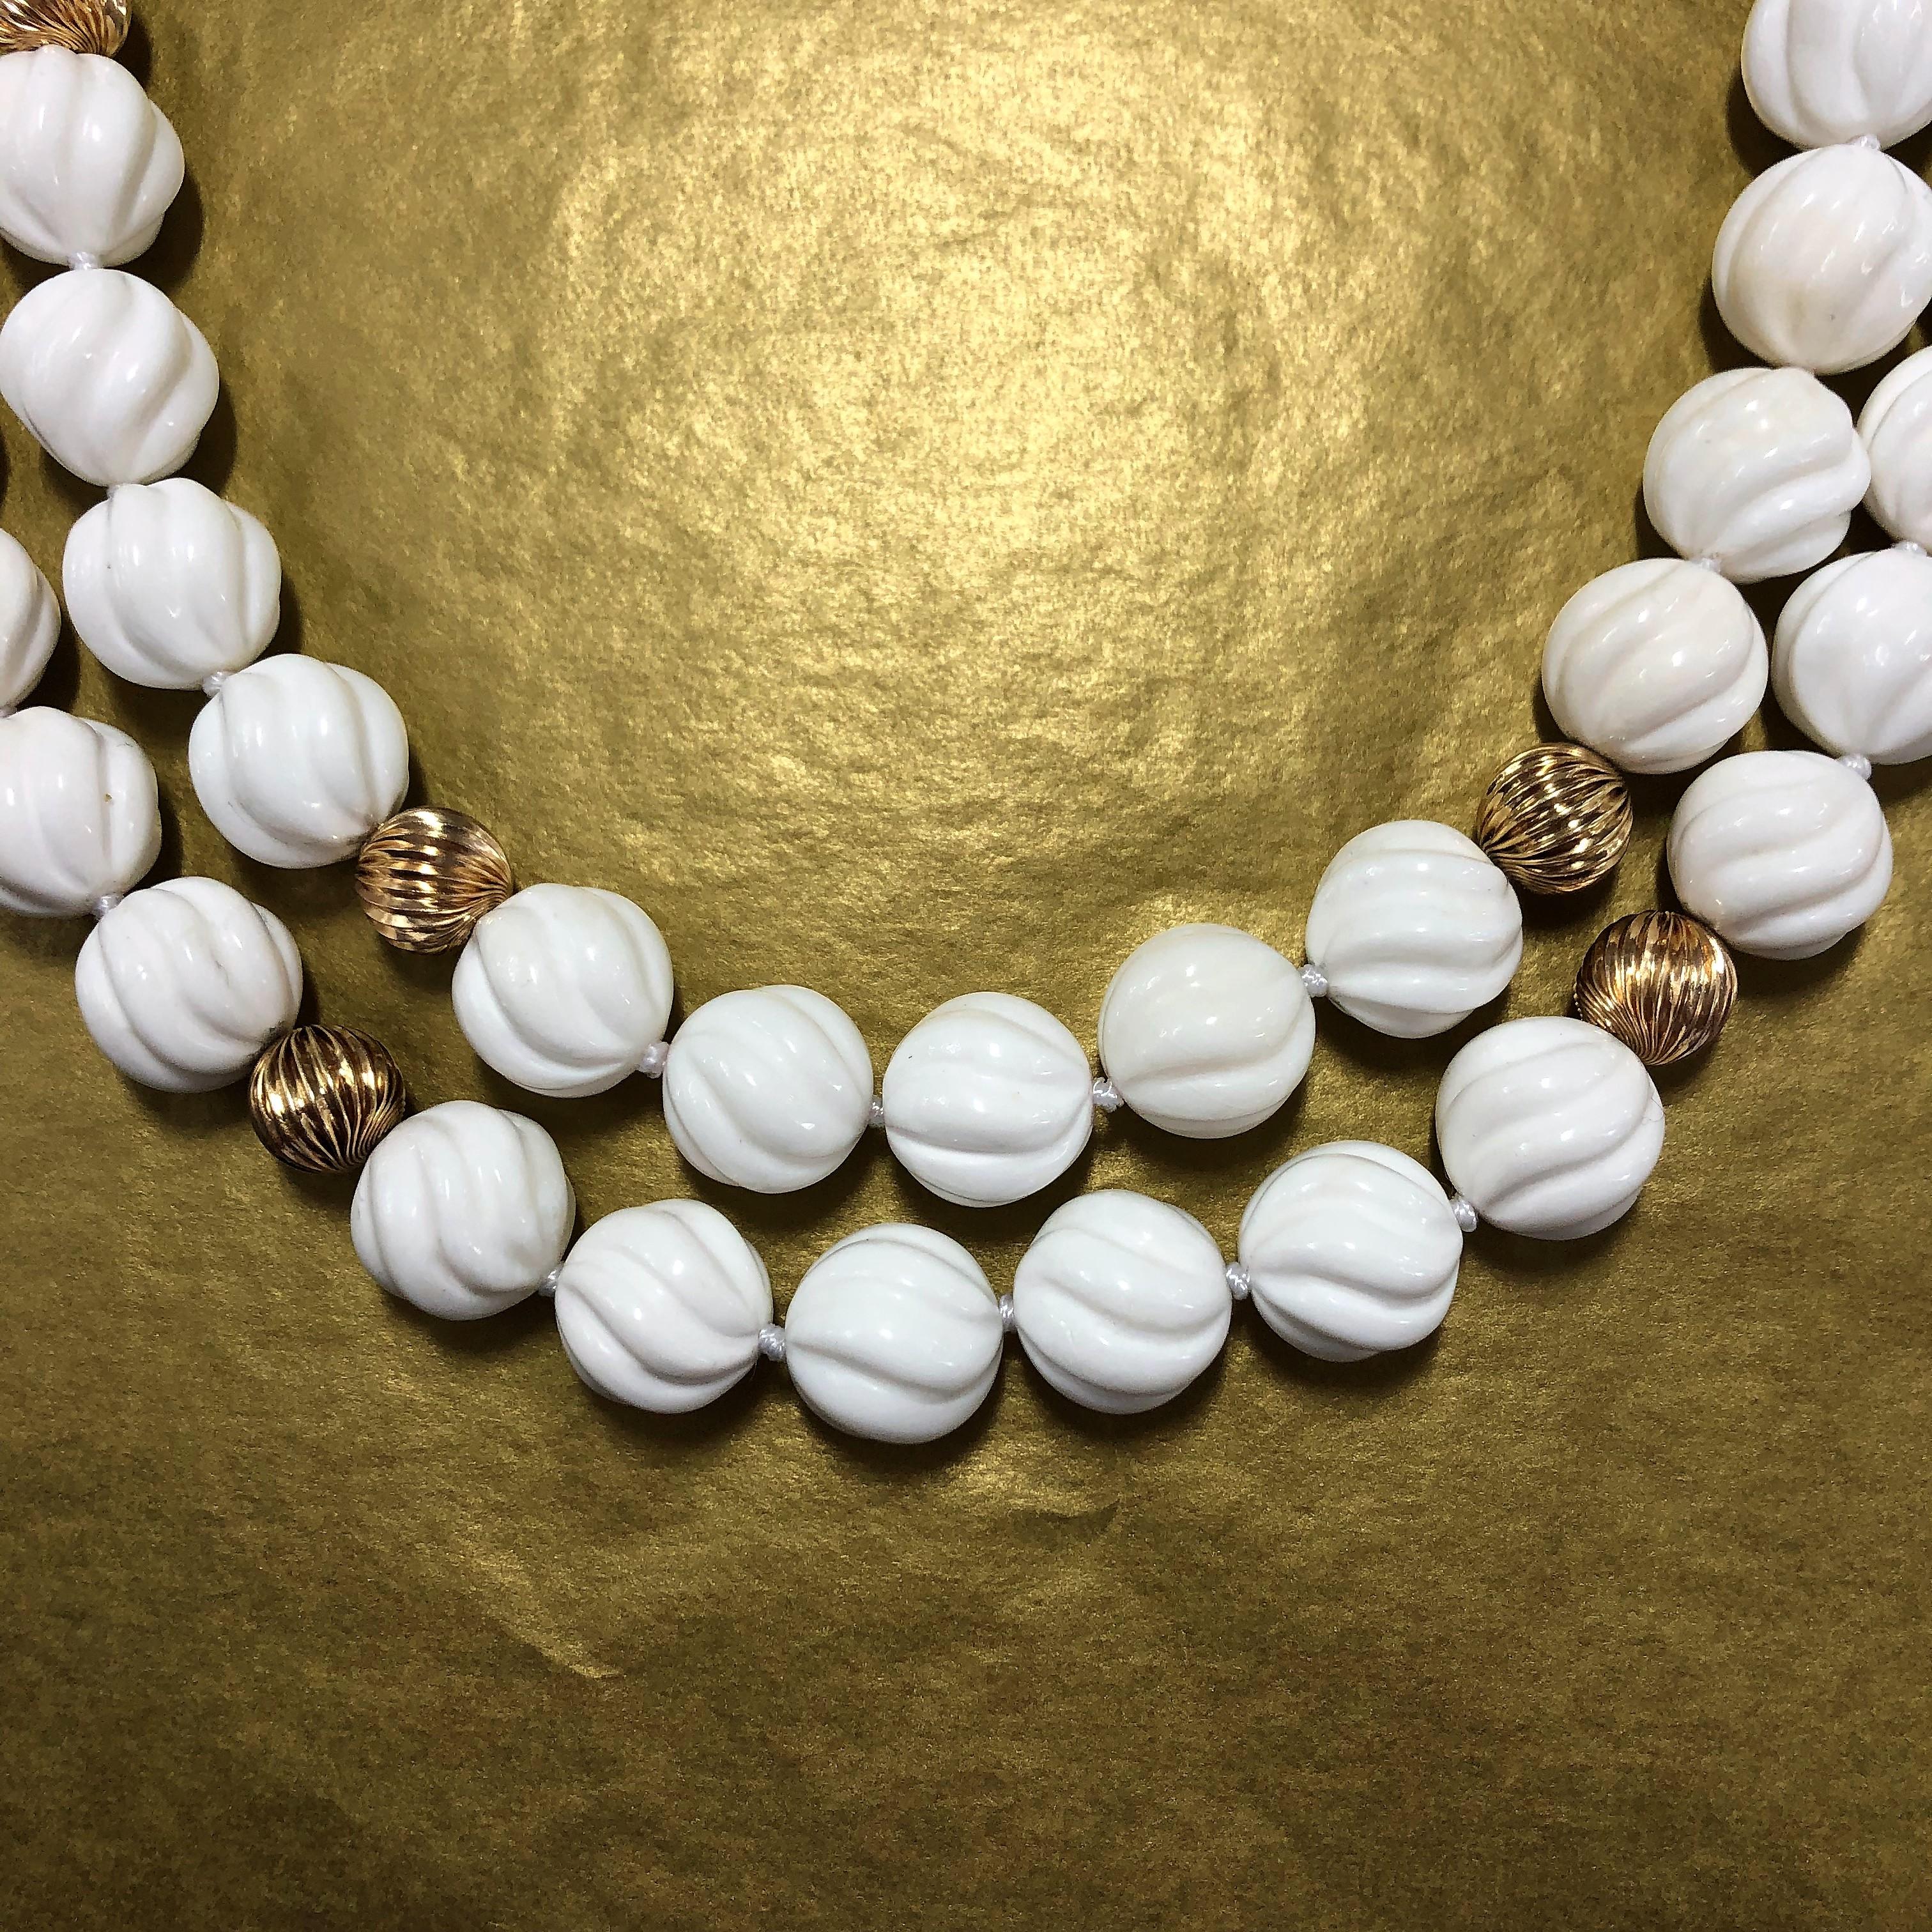 A wonderful set of bright white spiral design, shell beads with 14k Yellow Gold bead accents
and clasps. When the two clasps are aligned in the back, the set nests beautifully on the neck.
The inner strand measures 18 1/2 inches long by 5/8 inch